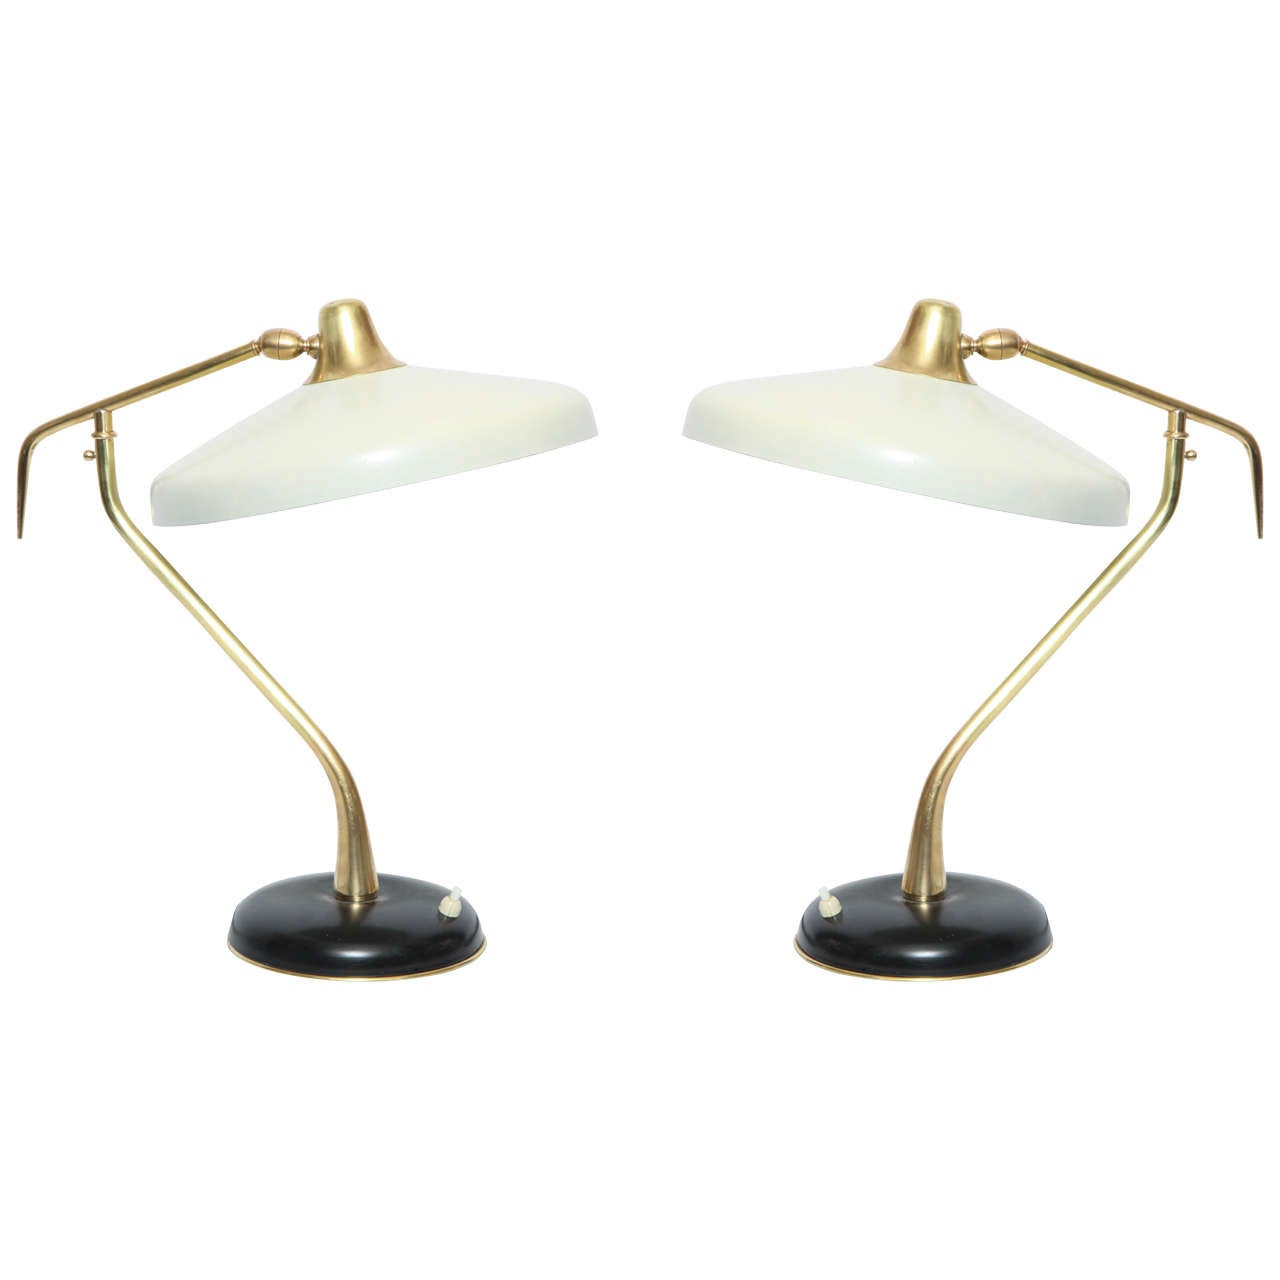 Pair of Italian, Early Articulated Table Lamps by Oscar Torlasco